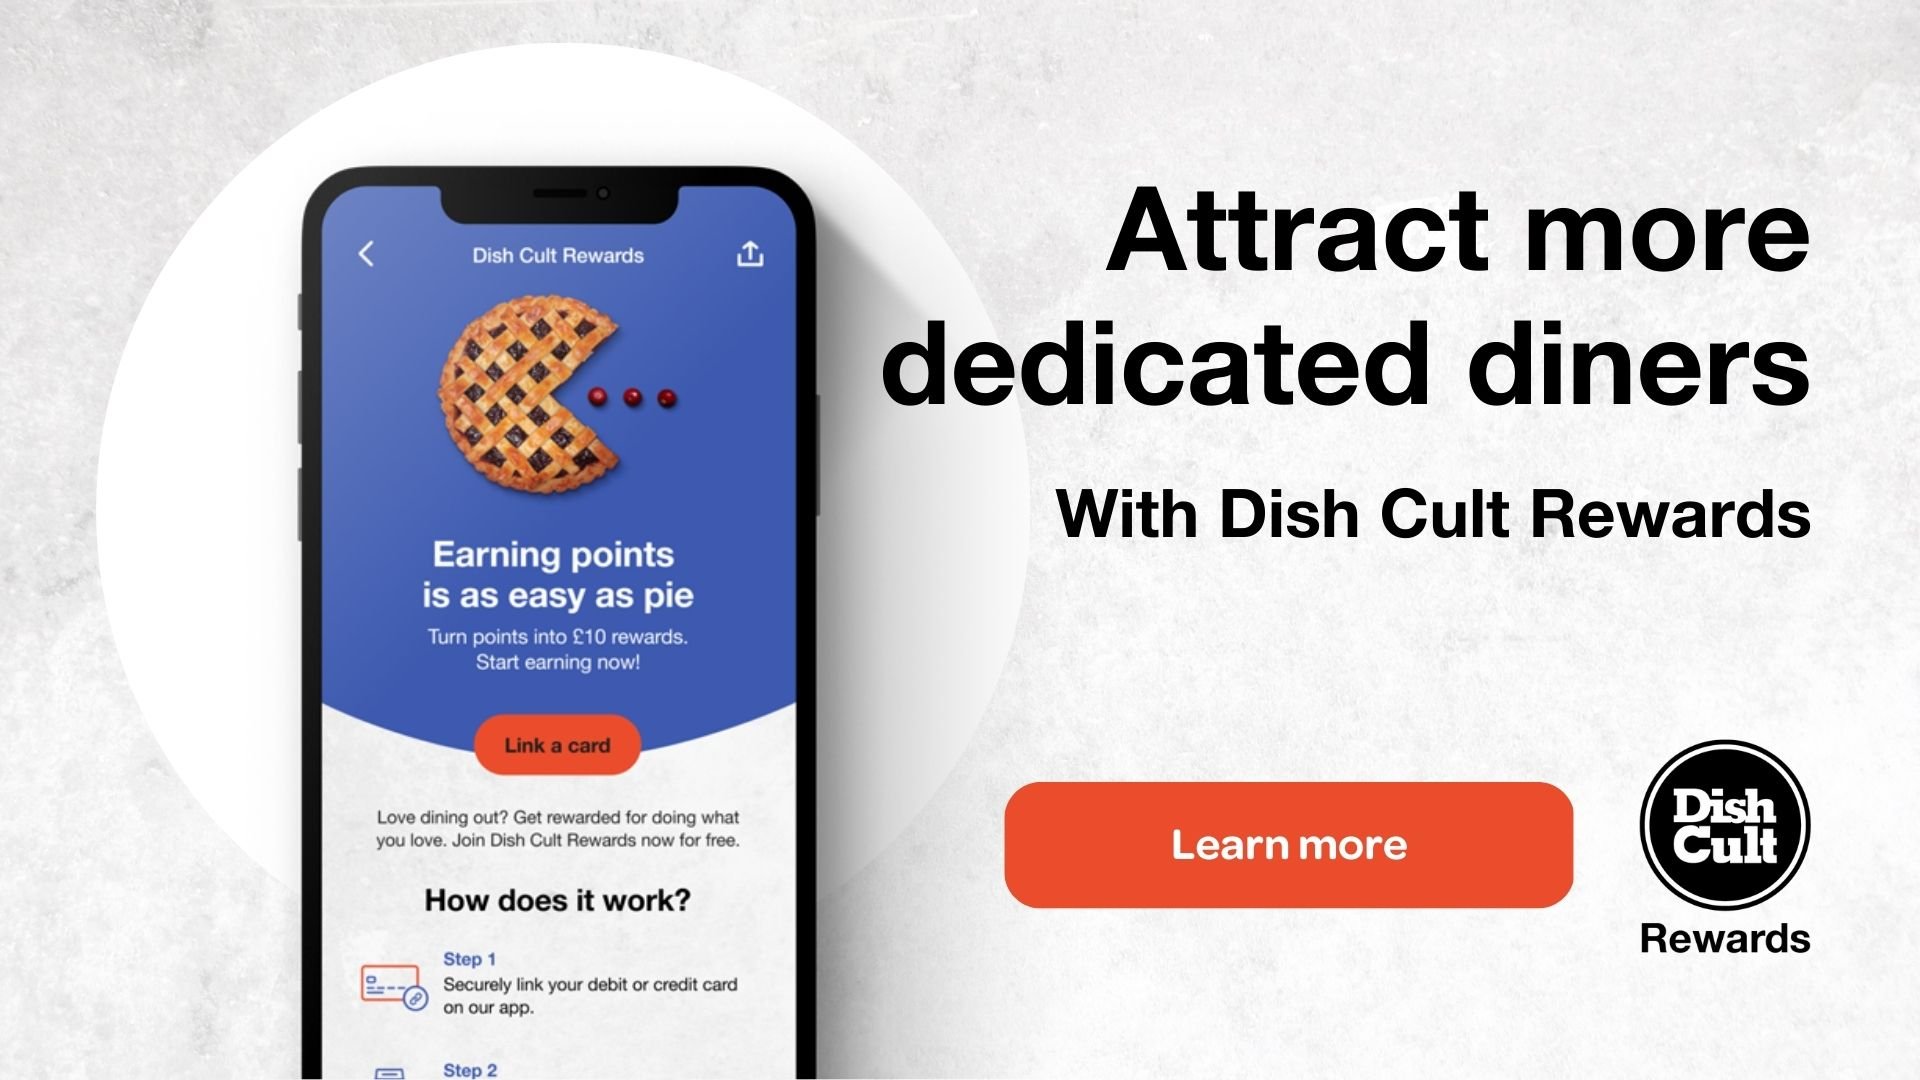 Attract more dedicated diners with Dish Cult Rewards